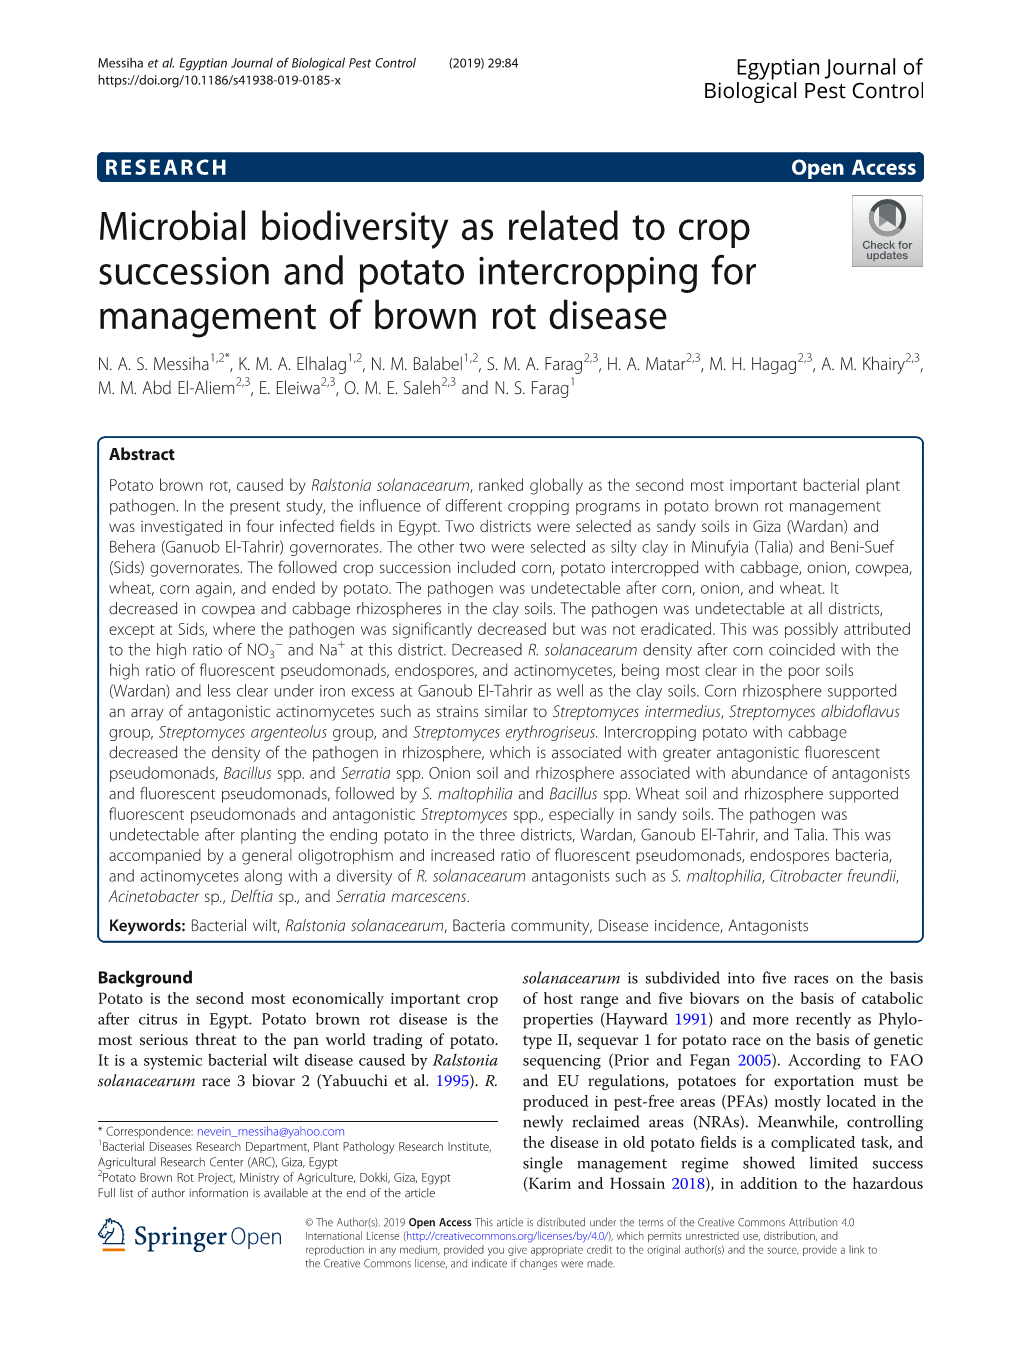 Microbial Biodiversity As Related to Crop Succession and Potato Intercropping for Management of Brown Rot Disease N